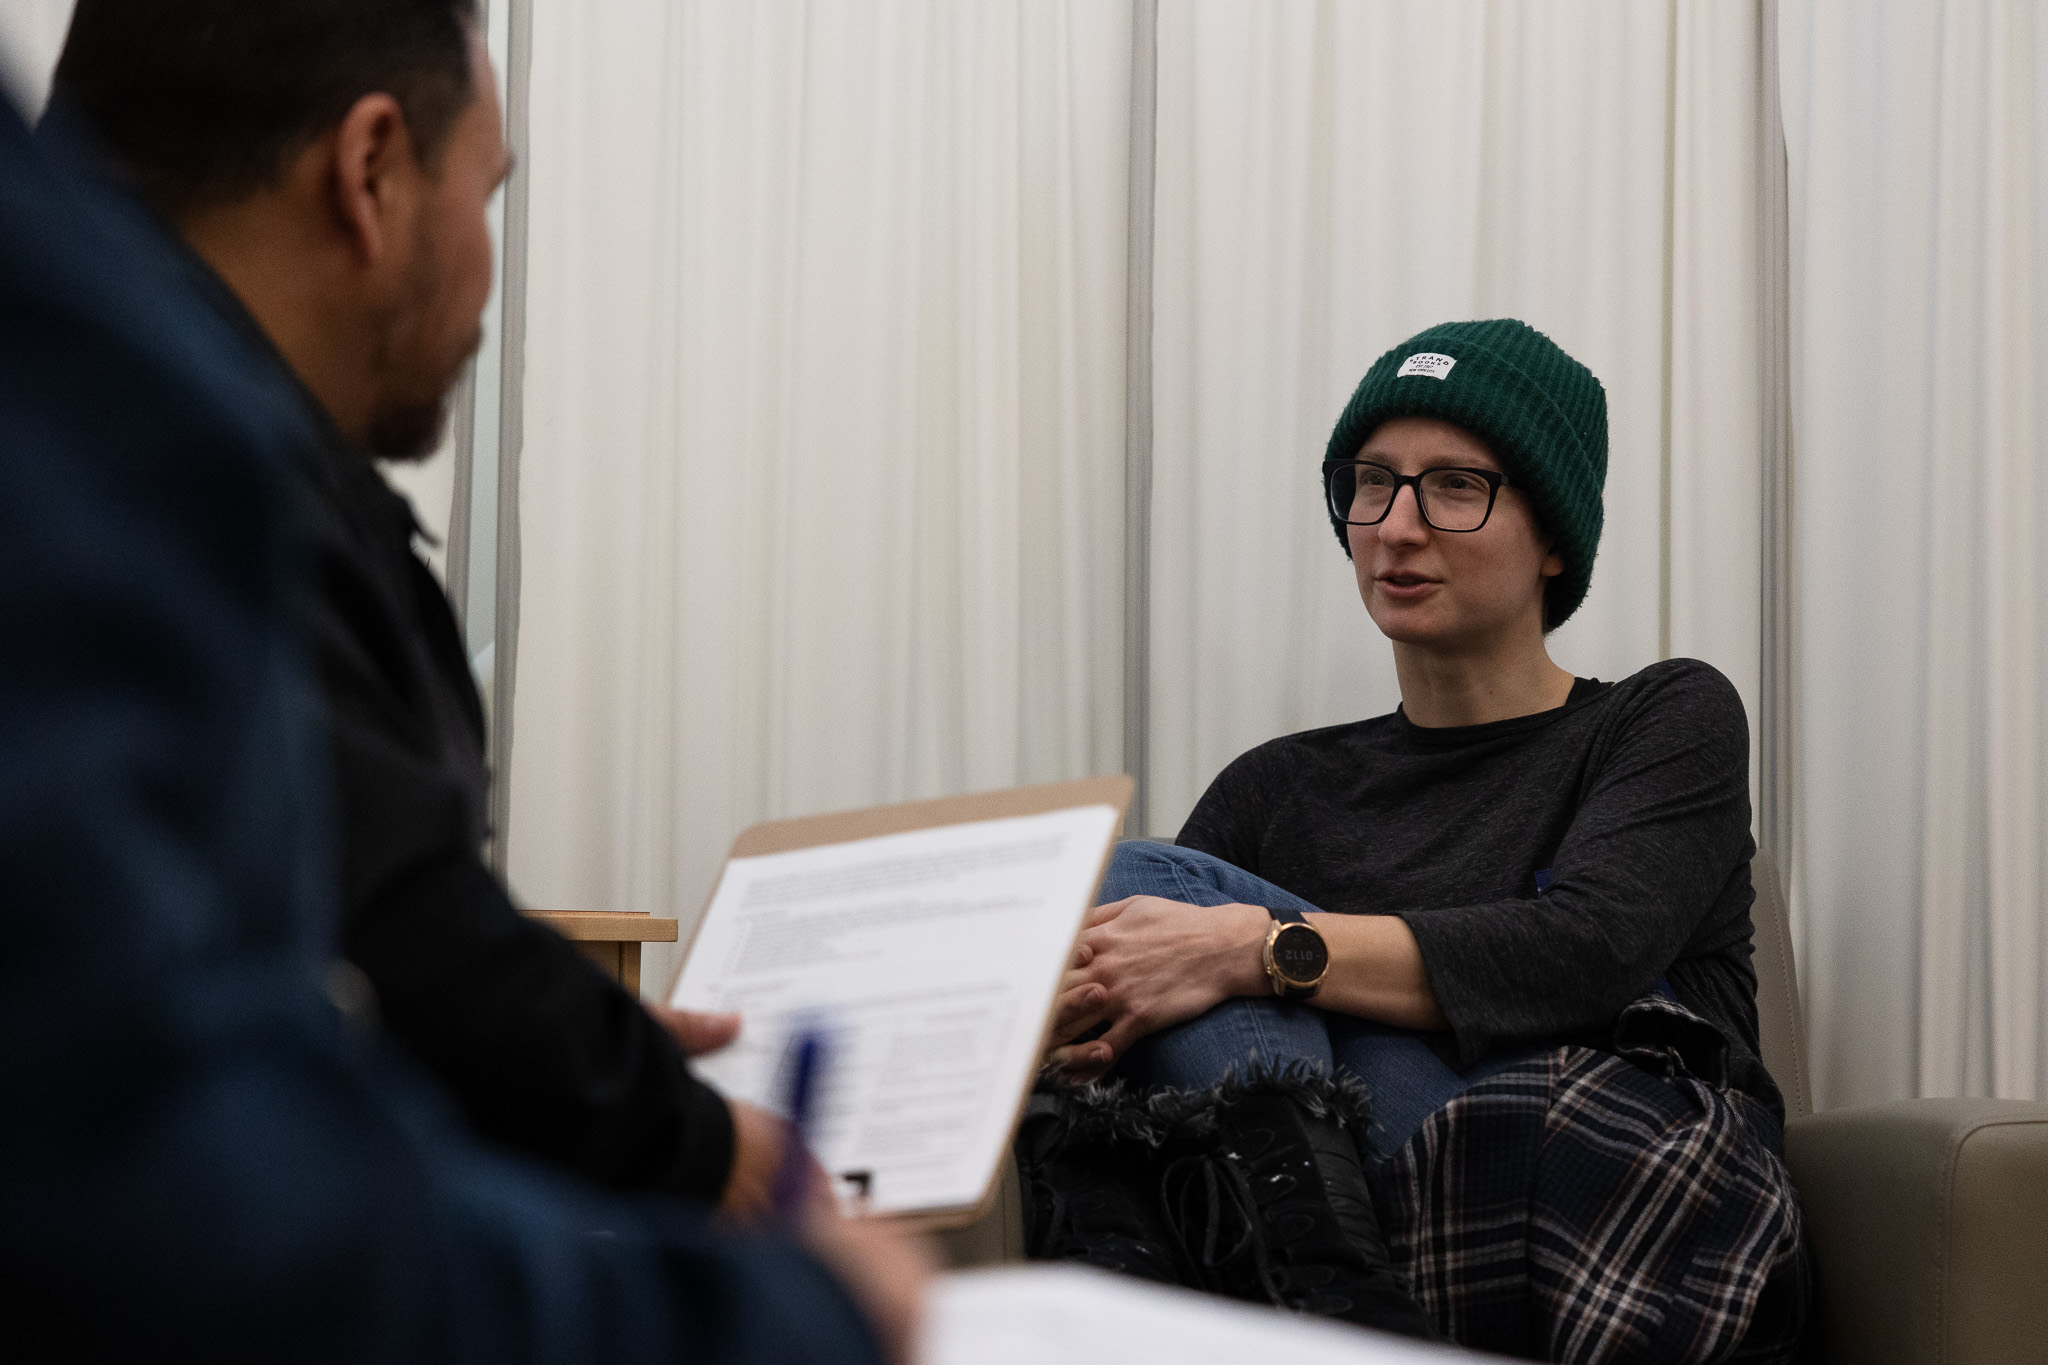 Young person in hat talking to blurry person holding clipboard